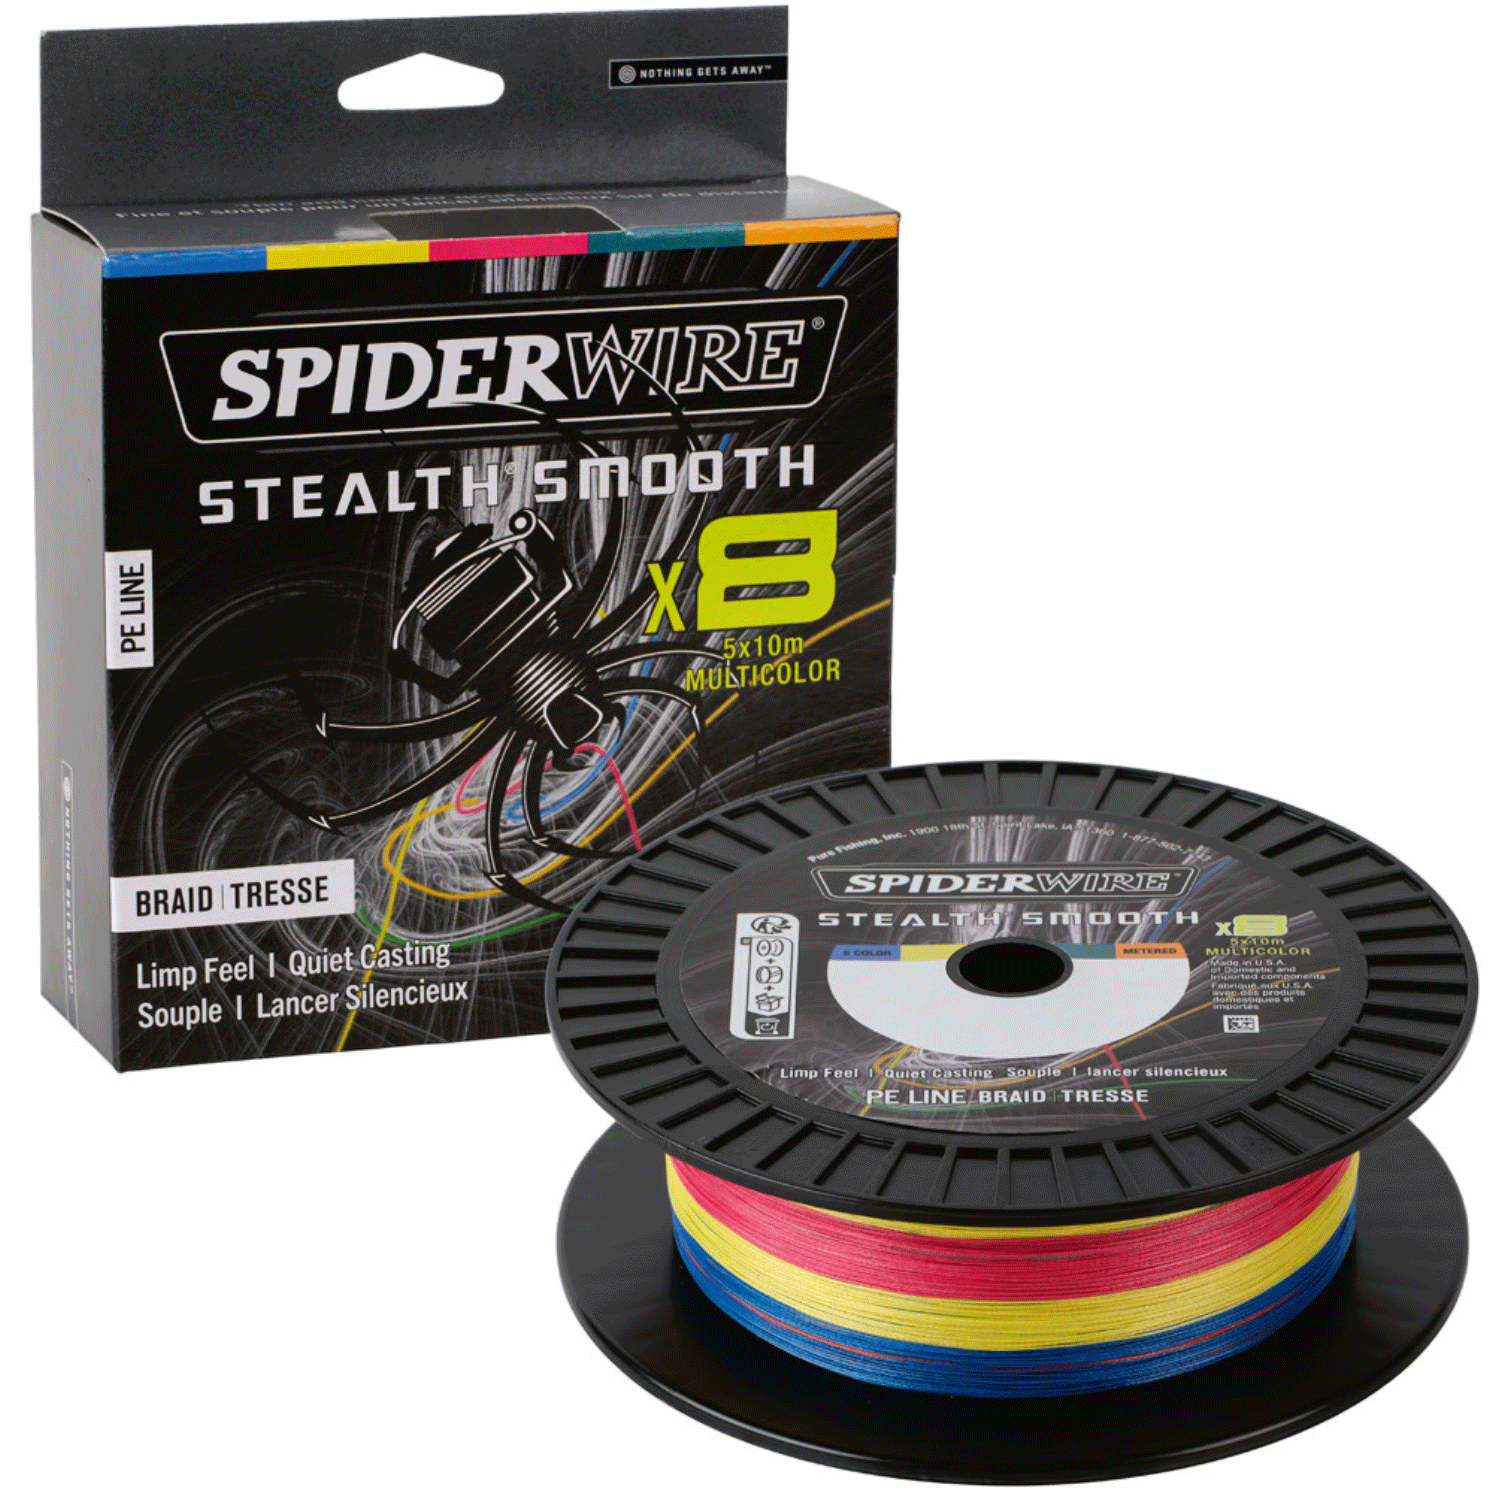 SpiderWire Stealth Smooth8 Braid - Multicolour 300m : 16.5kg – Glasgow  Angling Centre